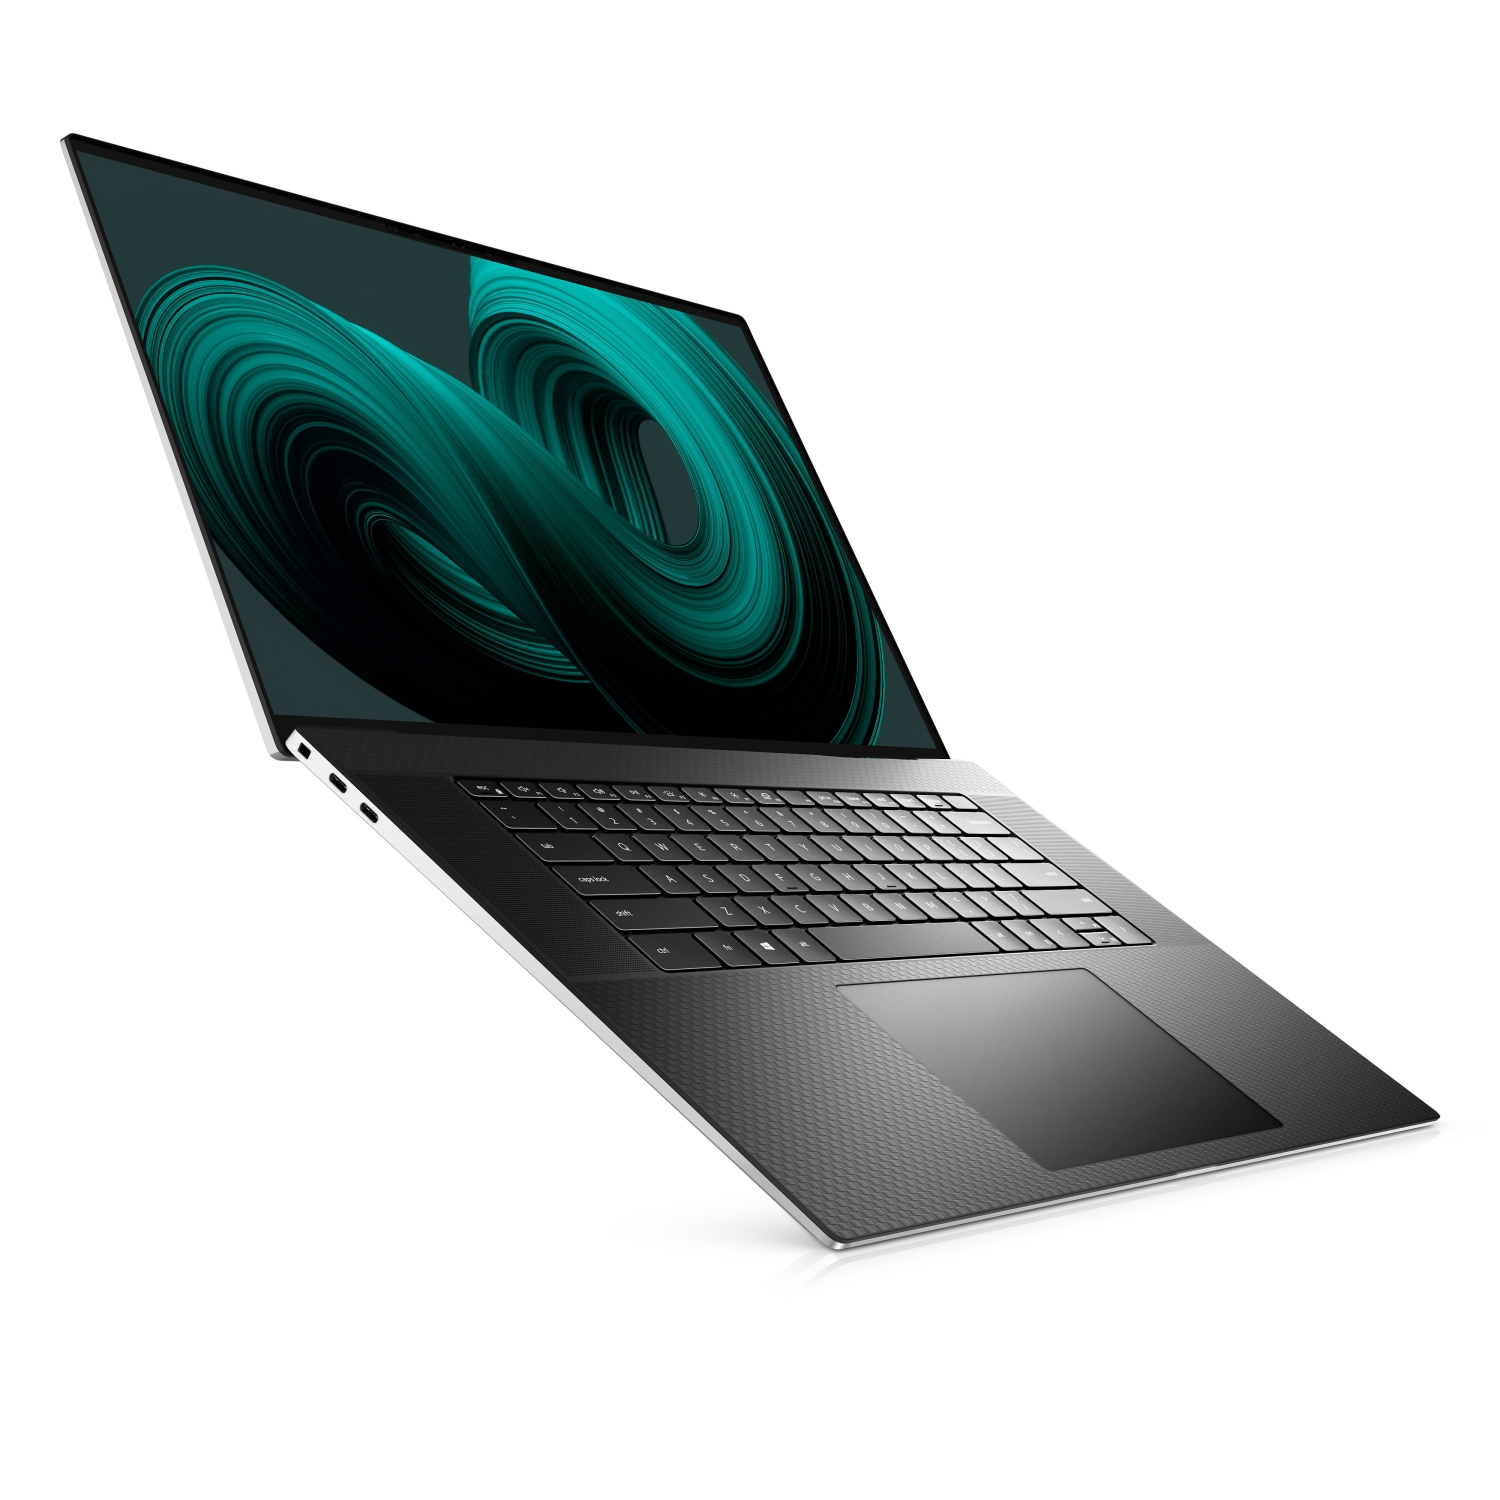 Refurbished (Excellent) – Dell XPS 9710 Laptop (2021) | 17" FHD+ Touch | Core i7 - 4TB SSD - 64GB RAM - RTX 3050 | 8 Cores @ 4.6 GHz - 11th Gen CPU